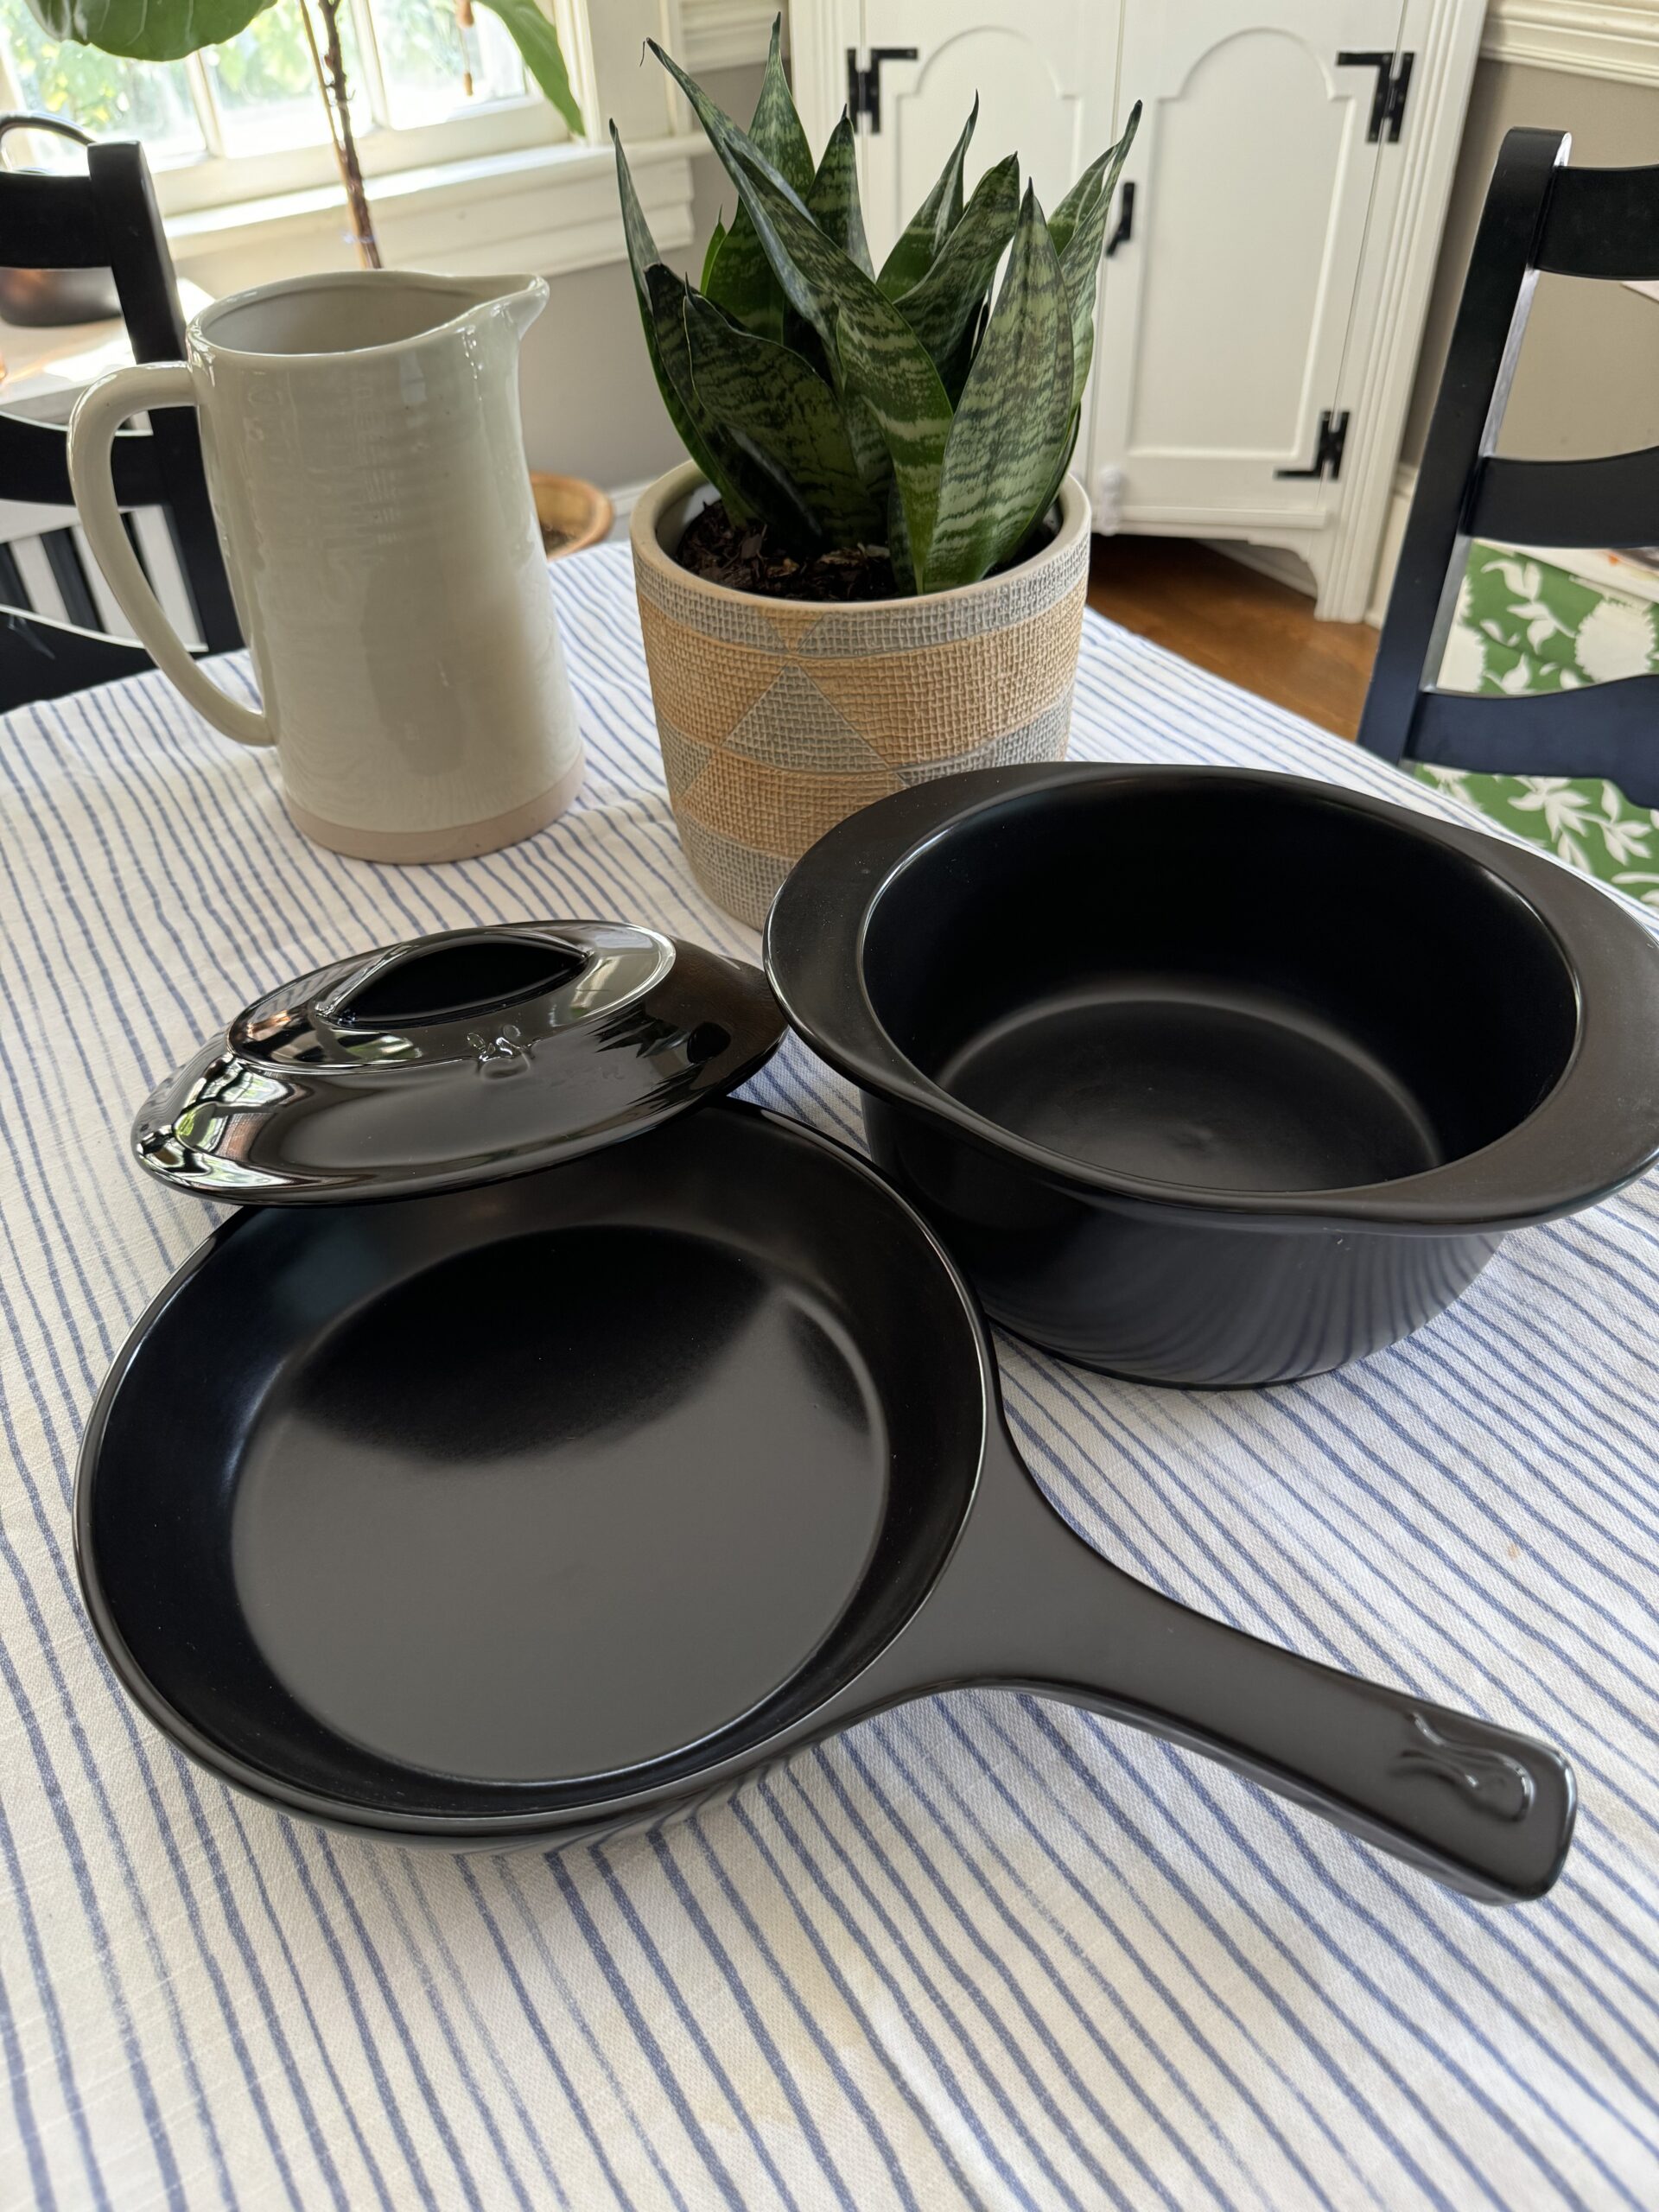 Black frying pan, a pot with a lid, a potted plant, and a ceramic pitcher on a white and blue striped tablecloth.